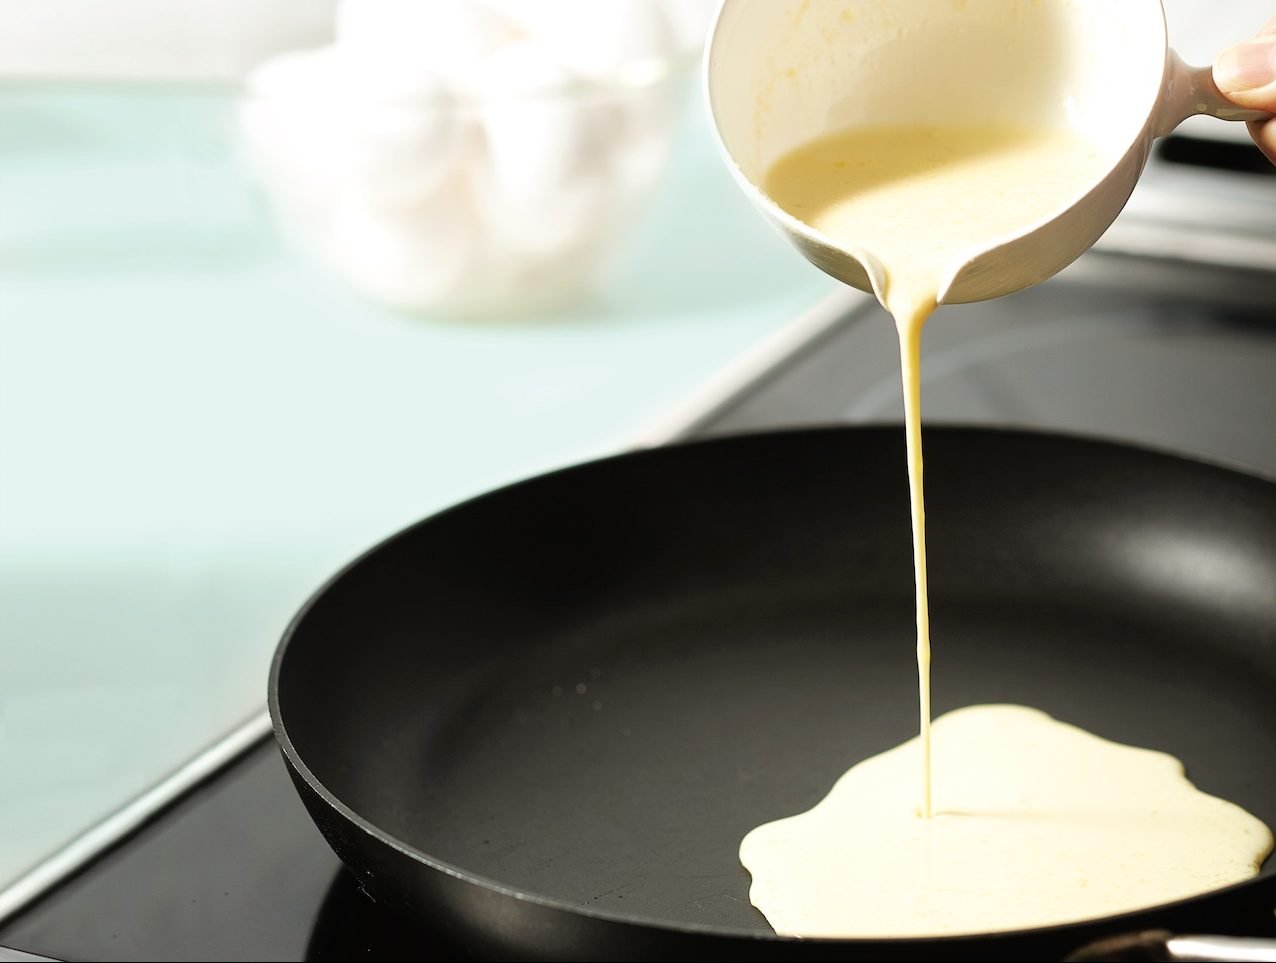 How to make crepes: Measuring cup of crepe batter pouring into a frying pan